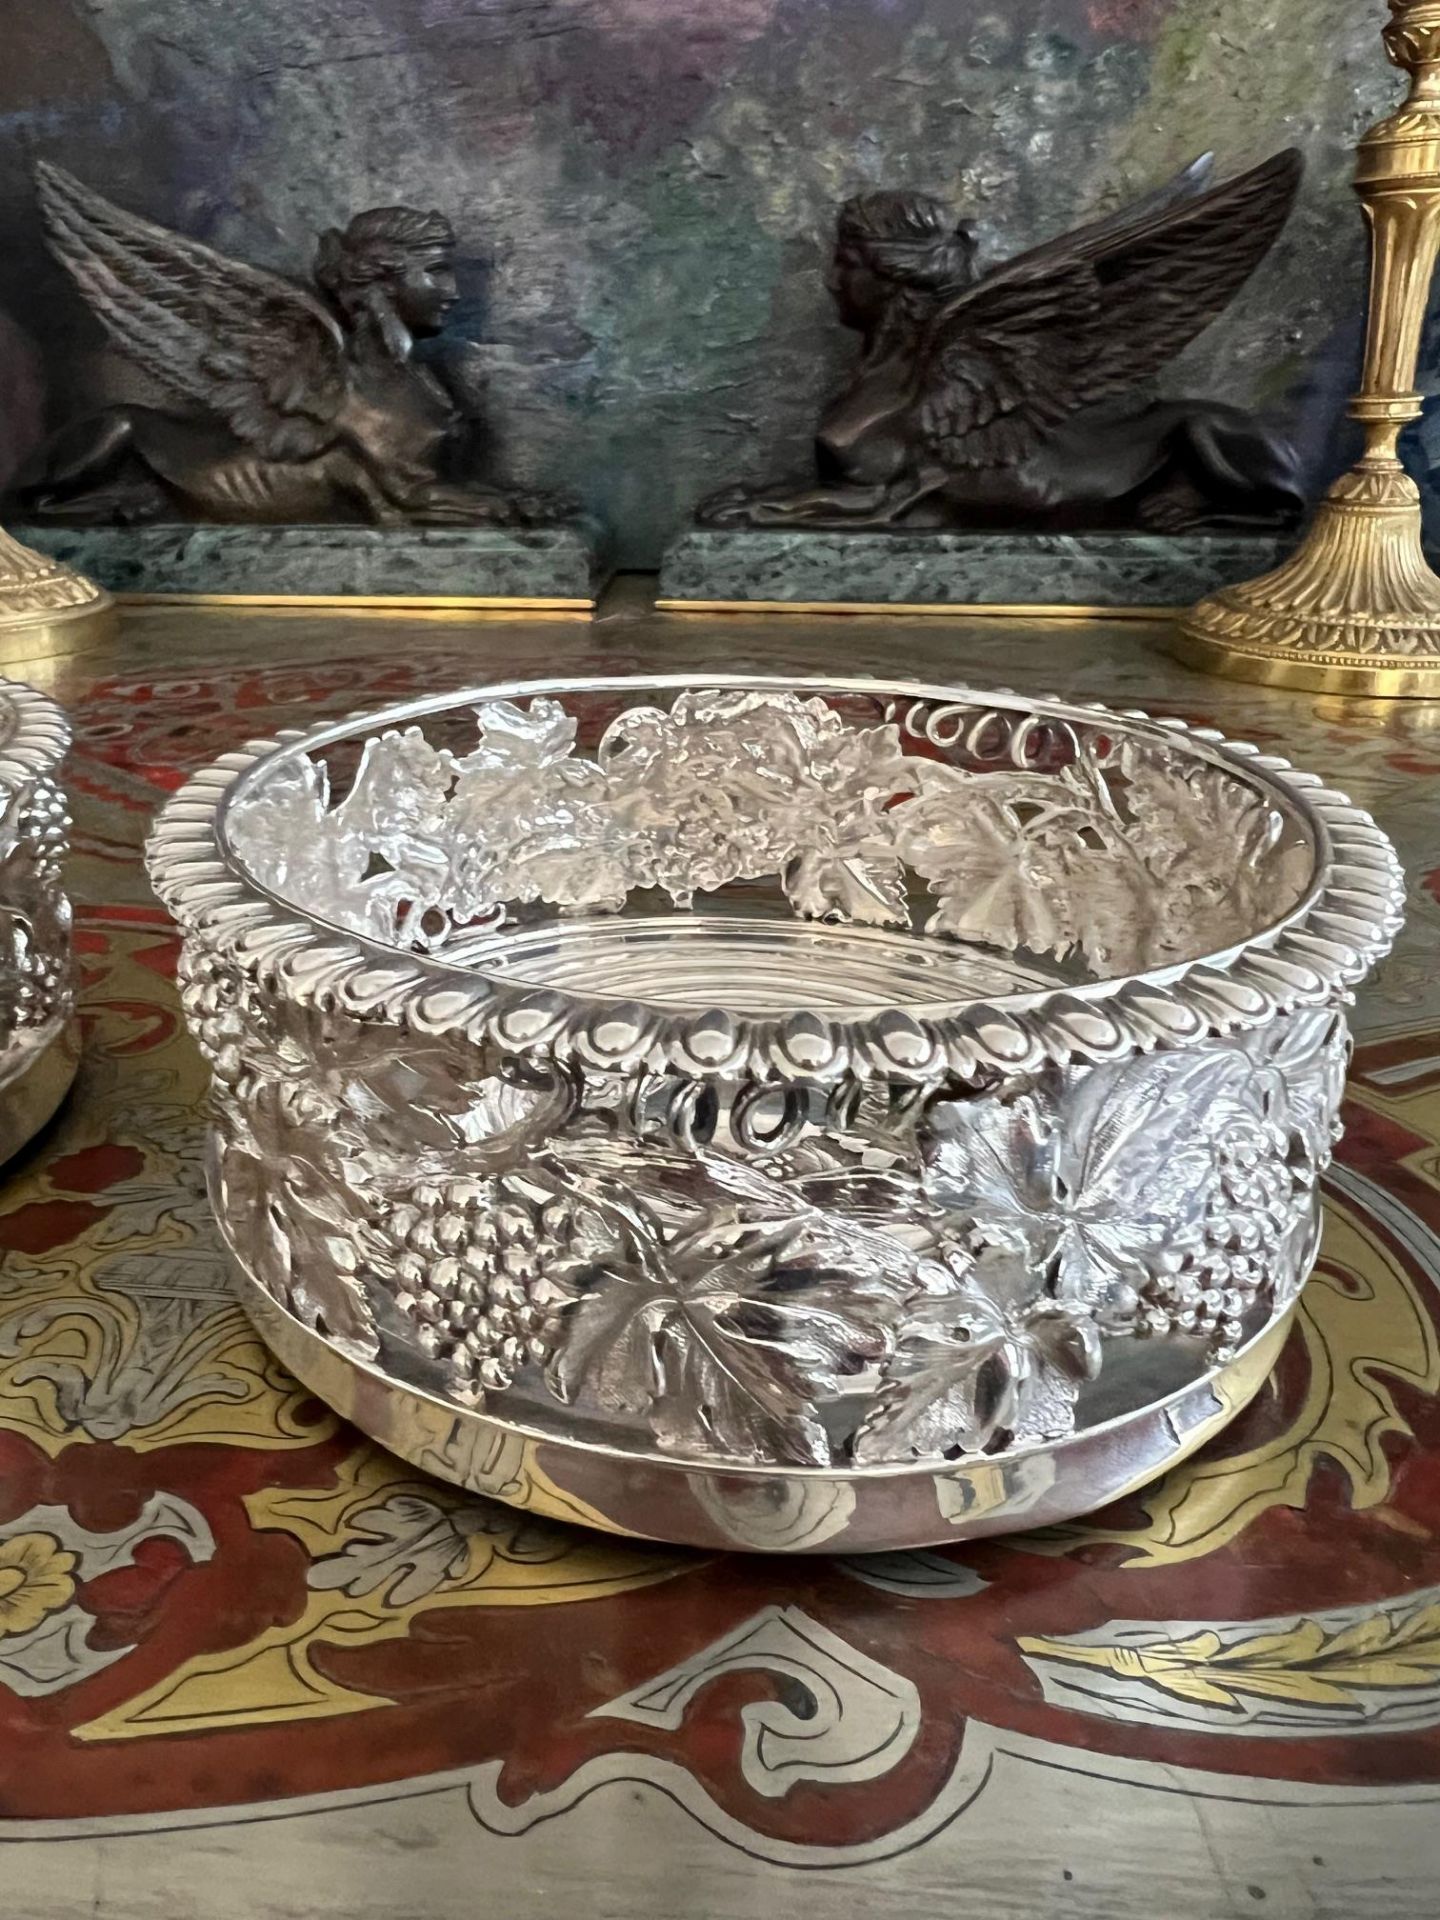 A FINE PAIR OF SUBSTANTIAL WILLIAM IV PERIOD STERLING SILVER WINE COASTERS C. 1837 - Image 5 of 9